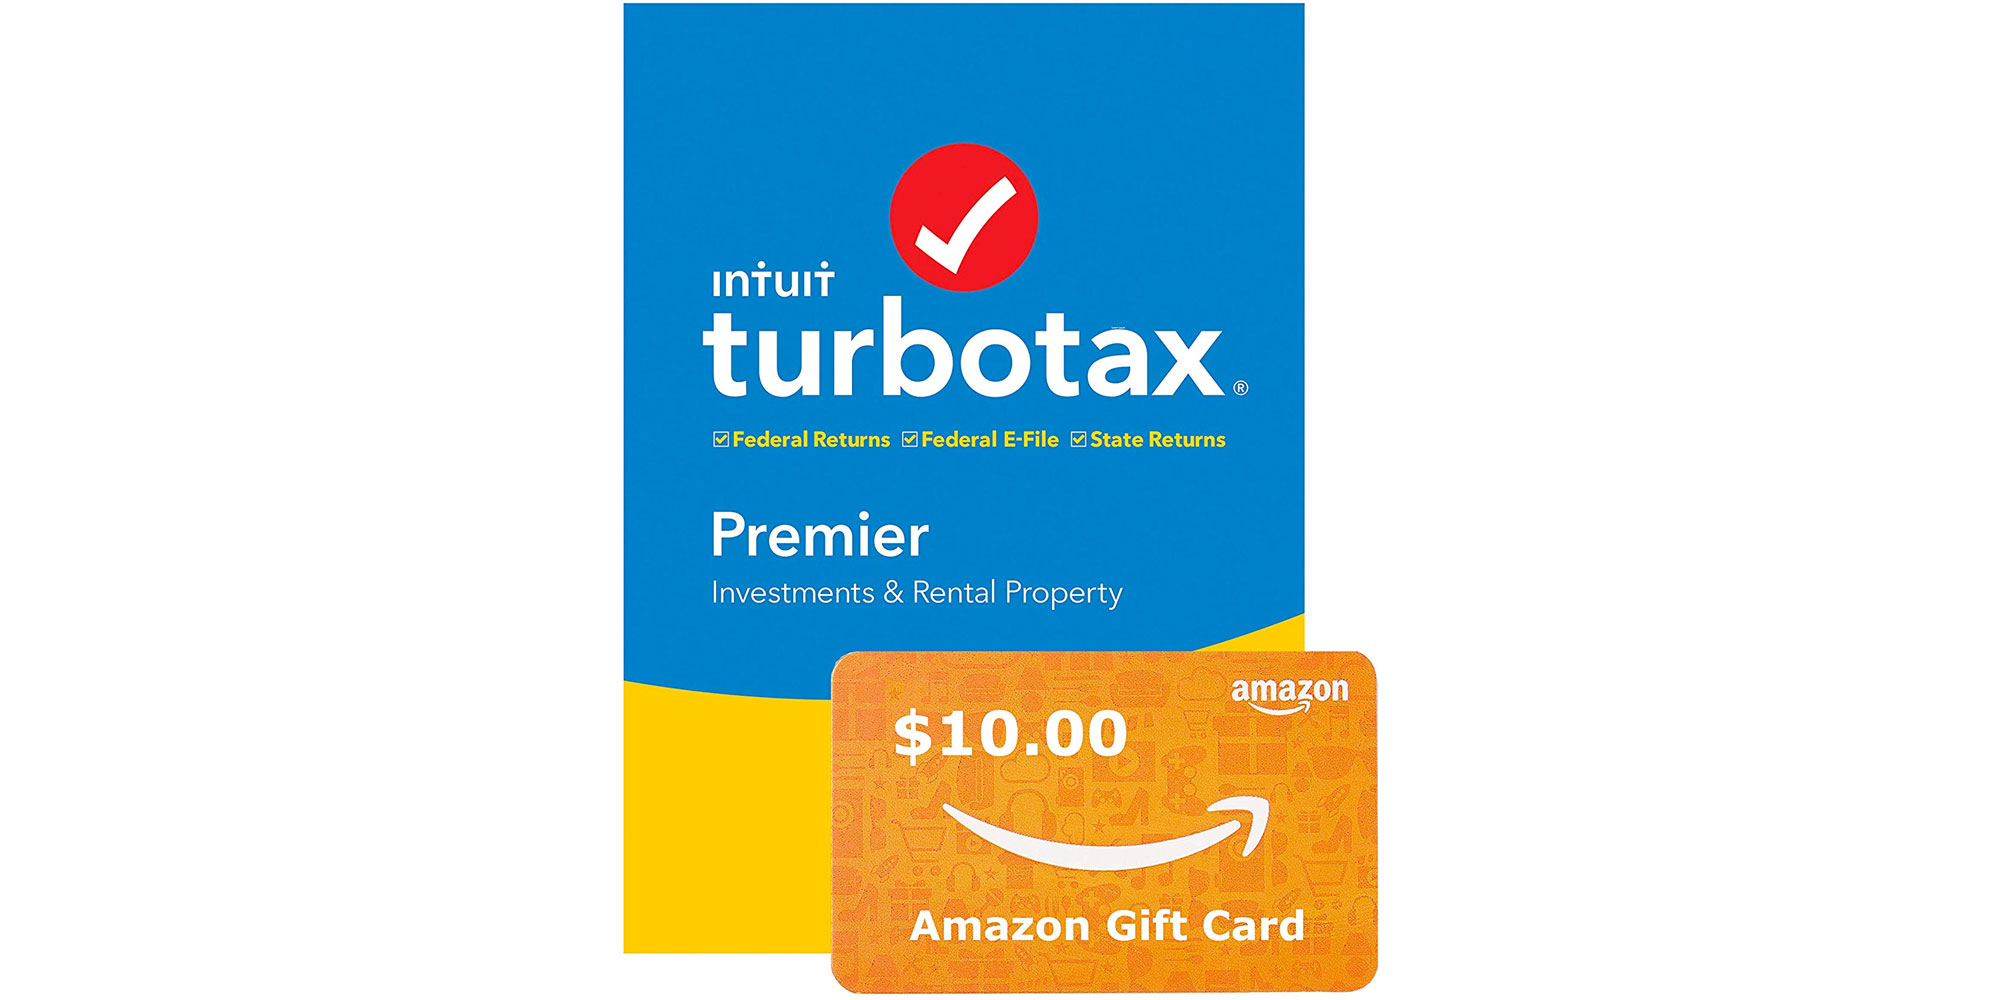 Prep for April with Amazon's Gold Box deals on TurboTax from 30